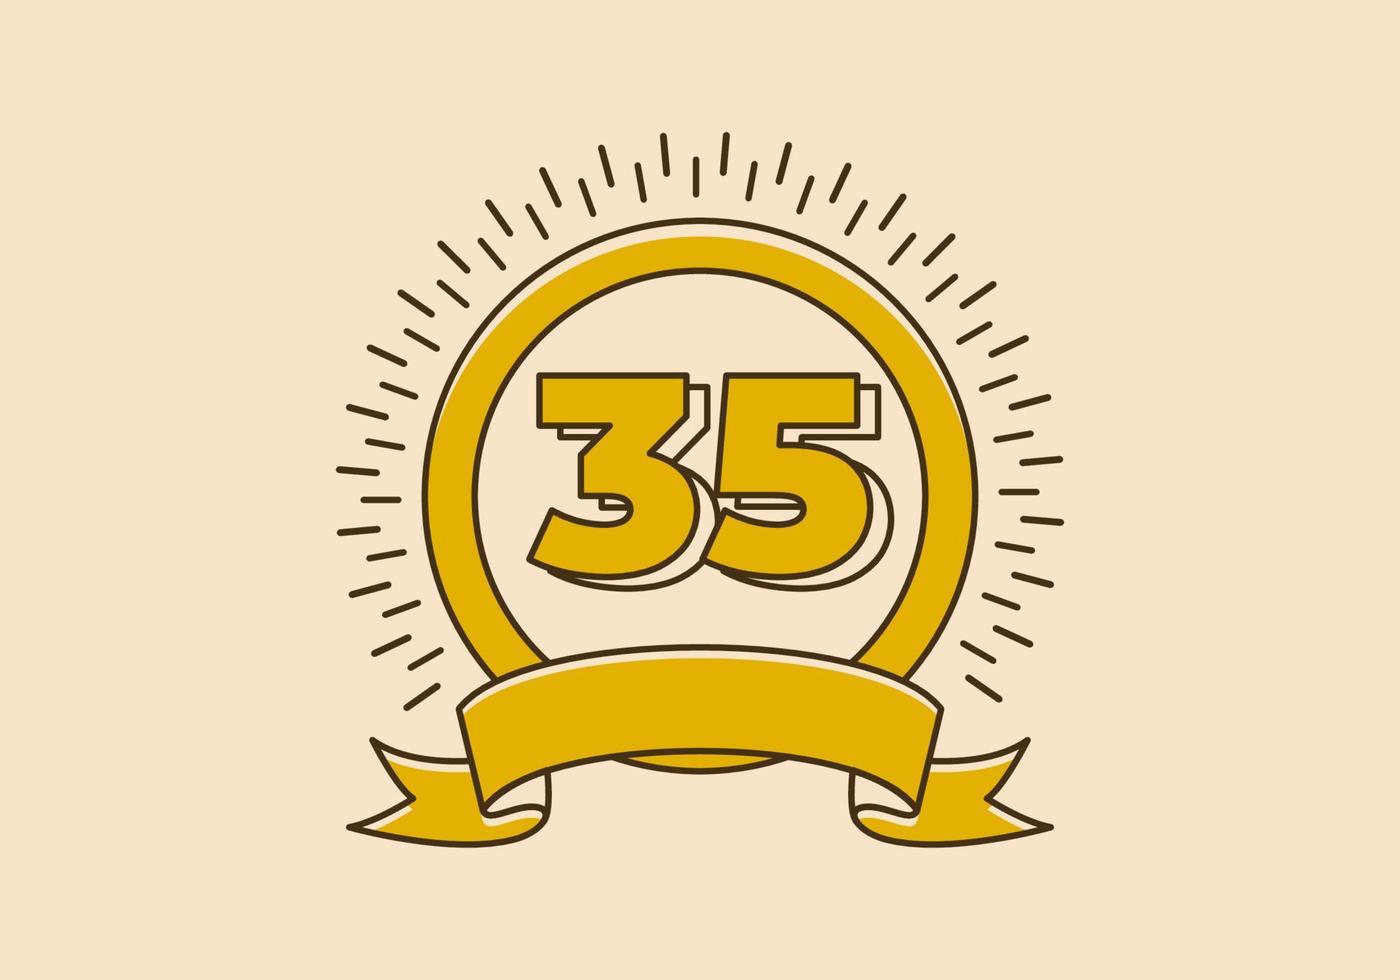 Vintage yellow circle badge with number 35 on it vector